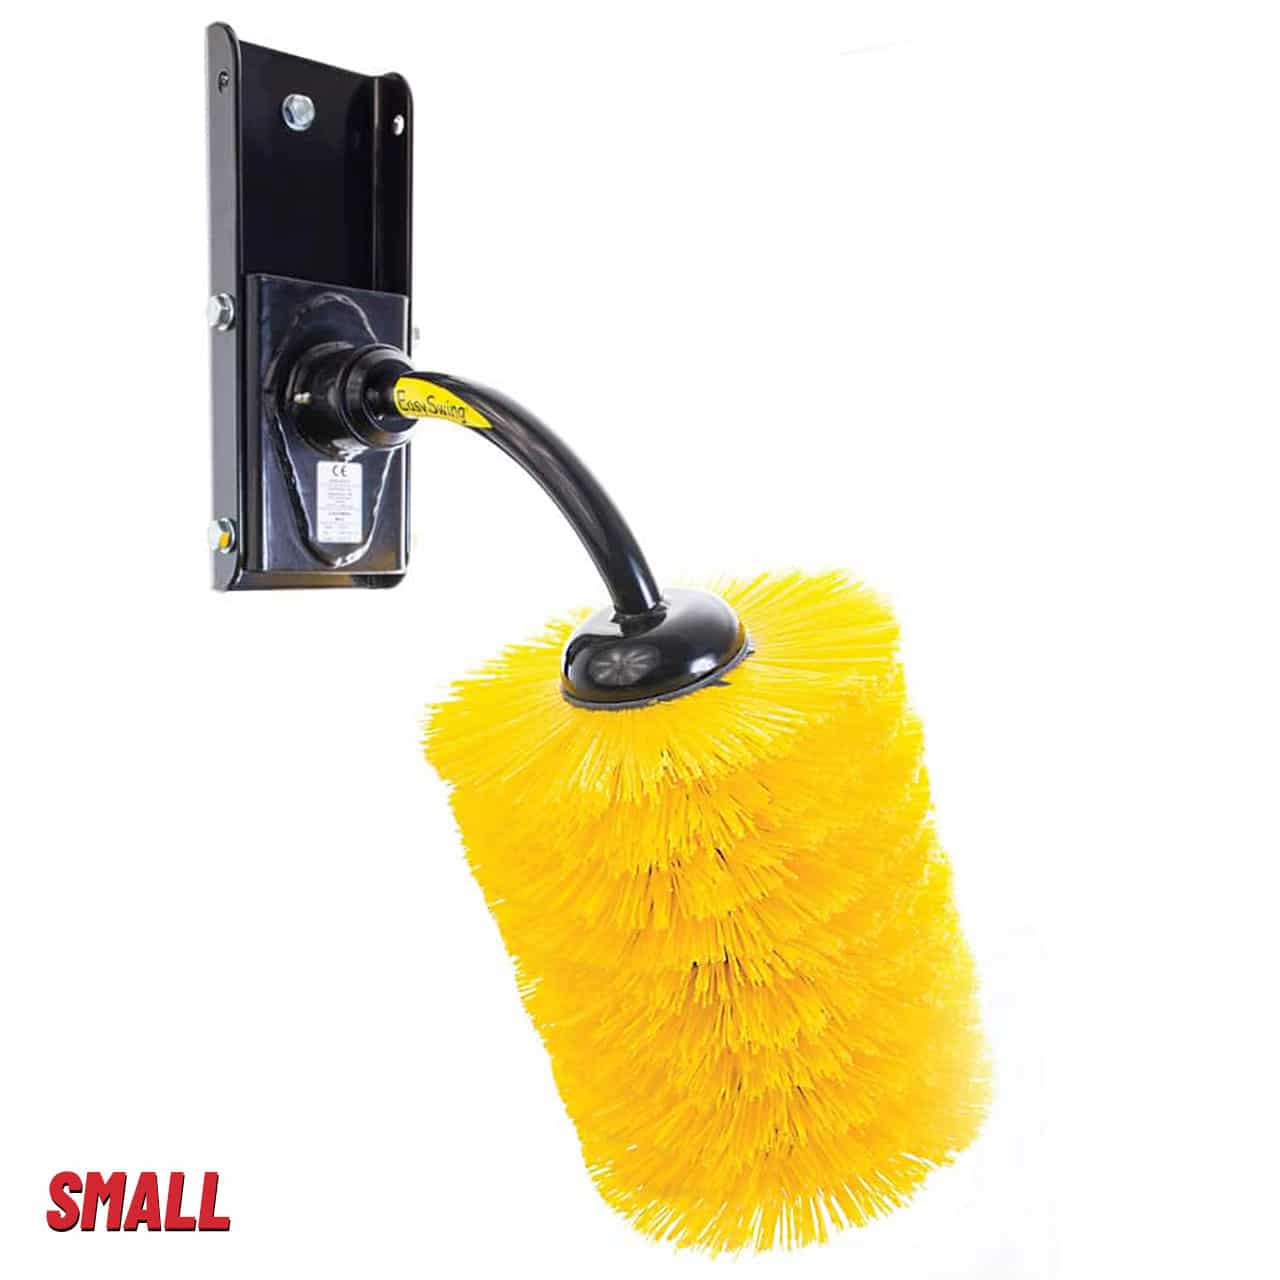 EasySwing Small Cow Brush for Sale | Low Maintenance Cattle Scratcher